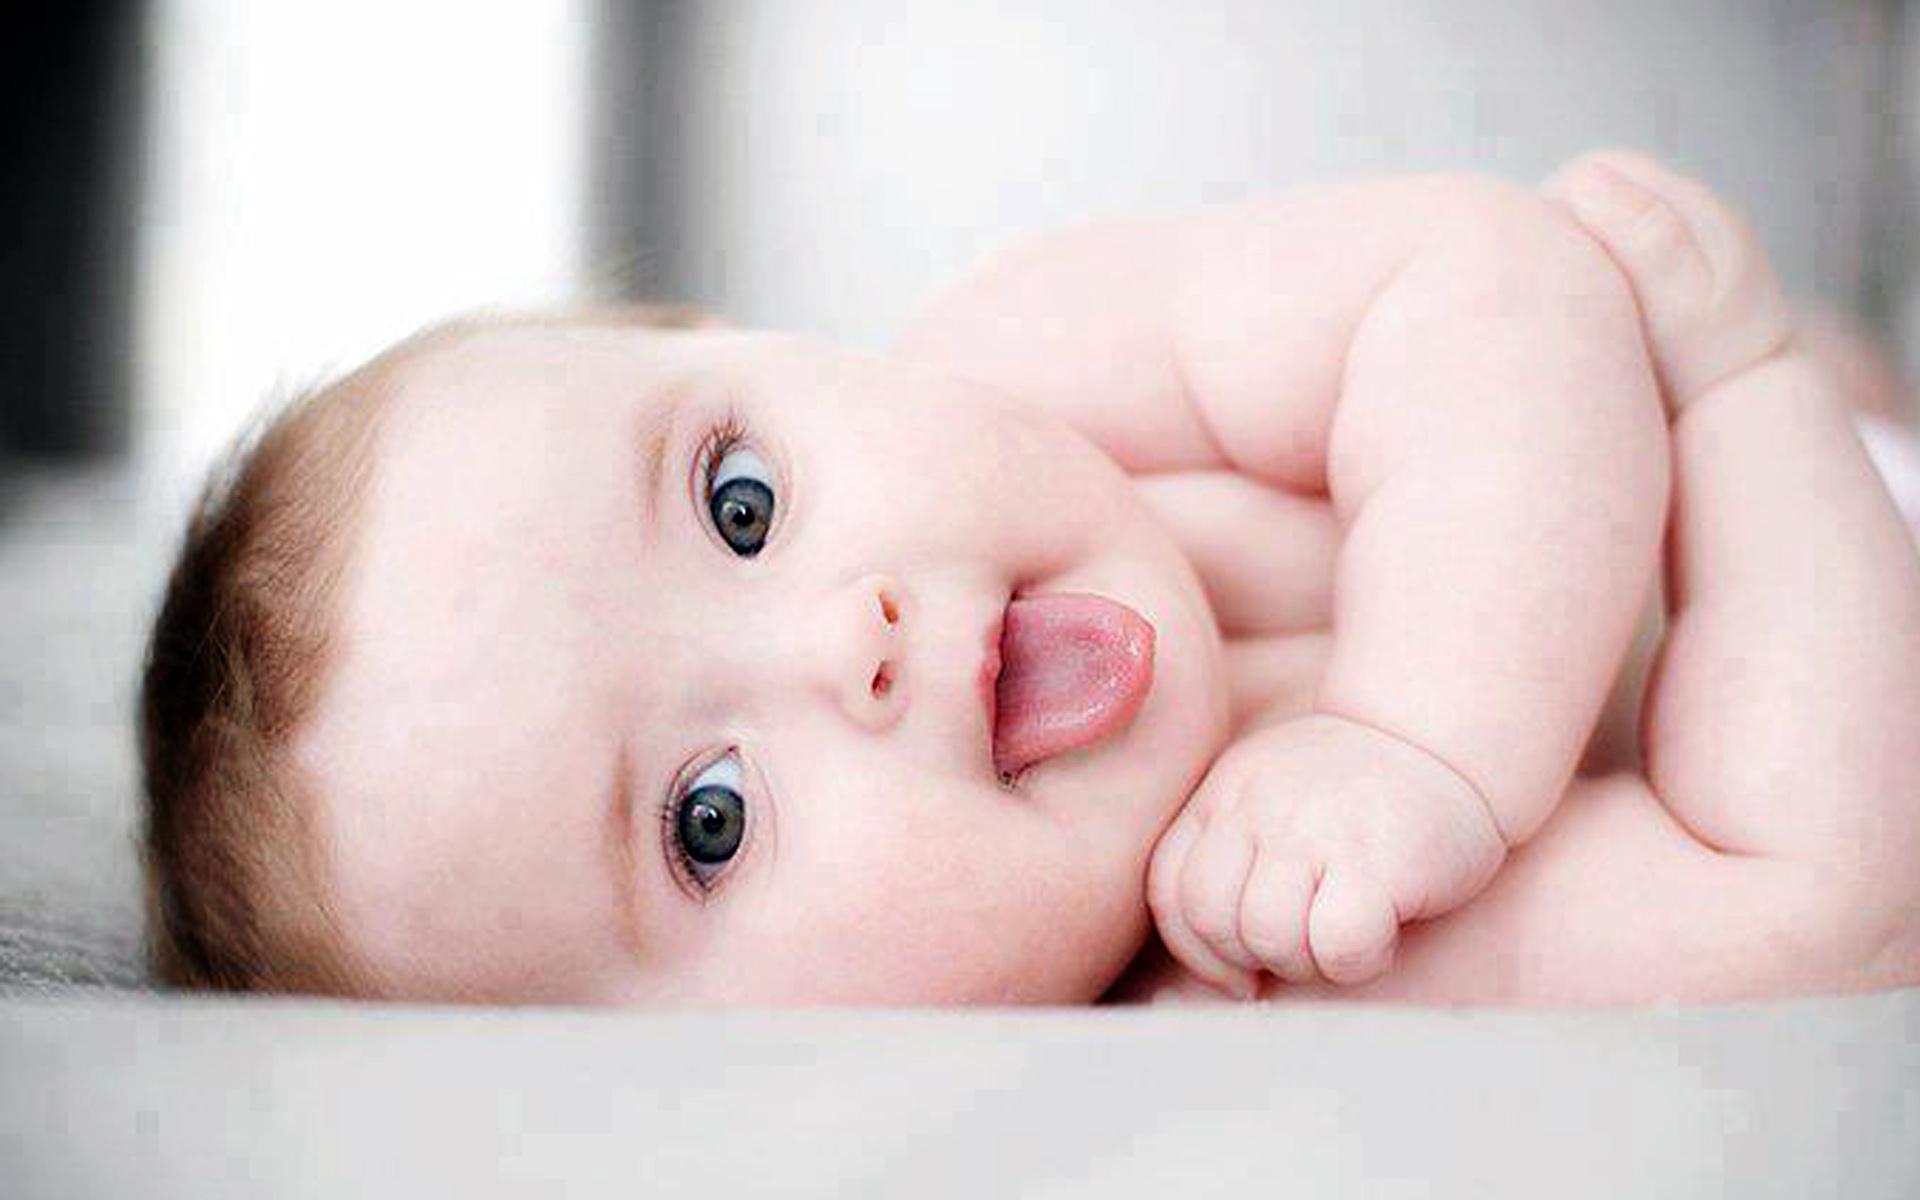 100 Small Baby Pictures HD  Download Free Images on Unsplash